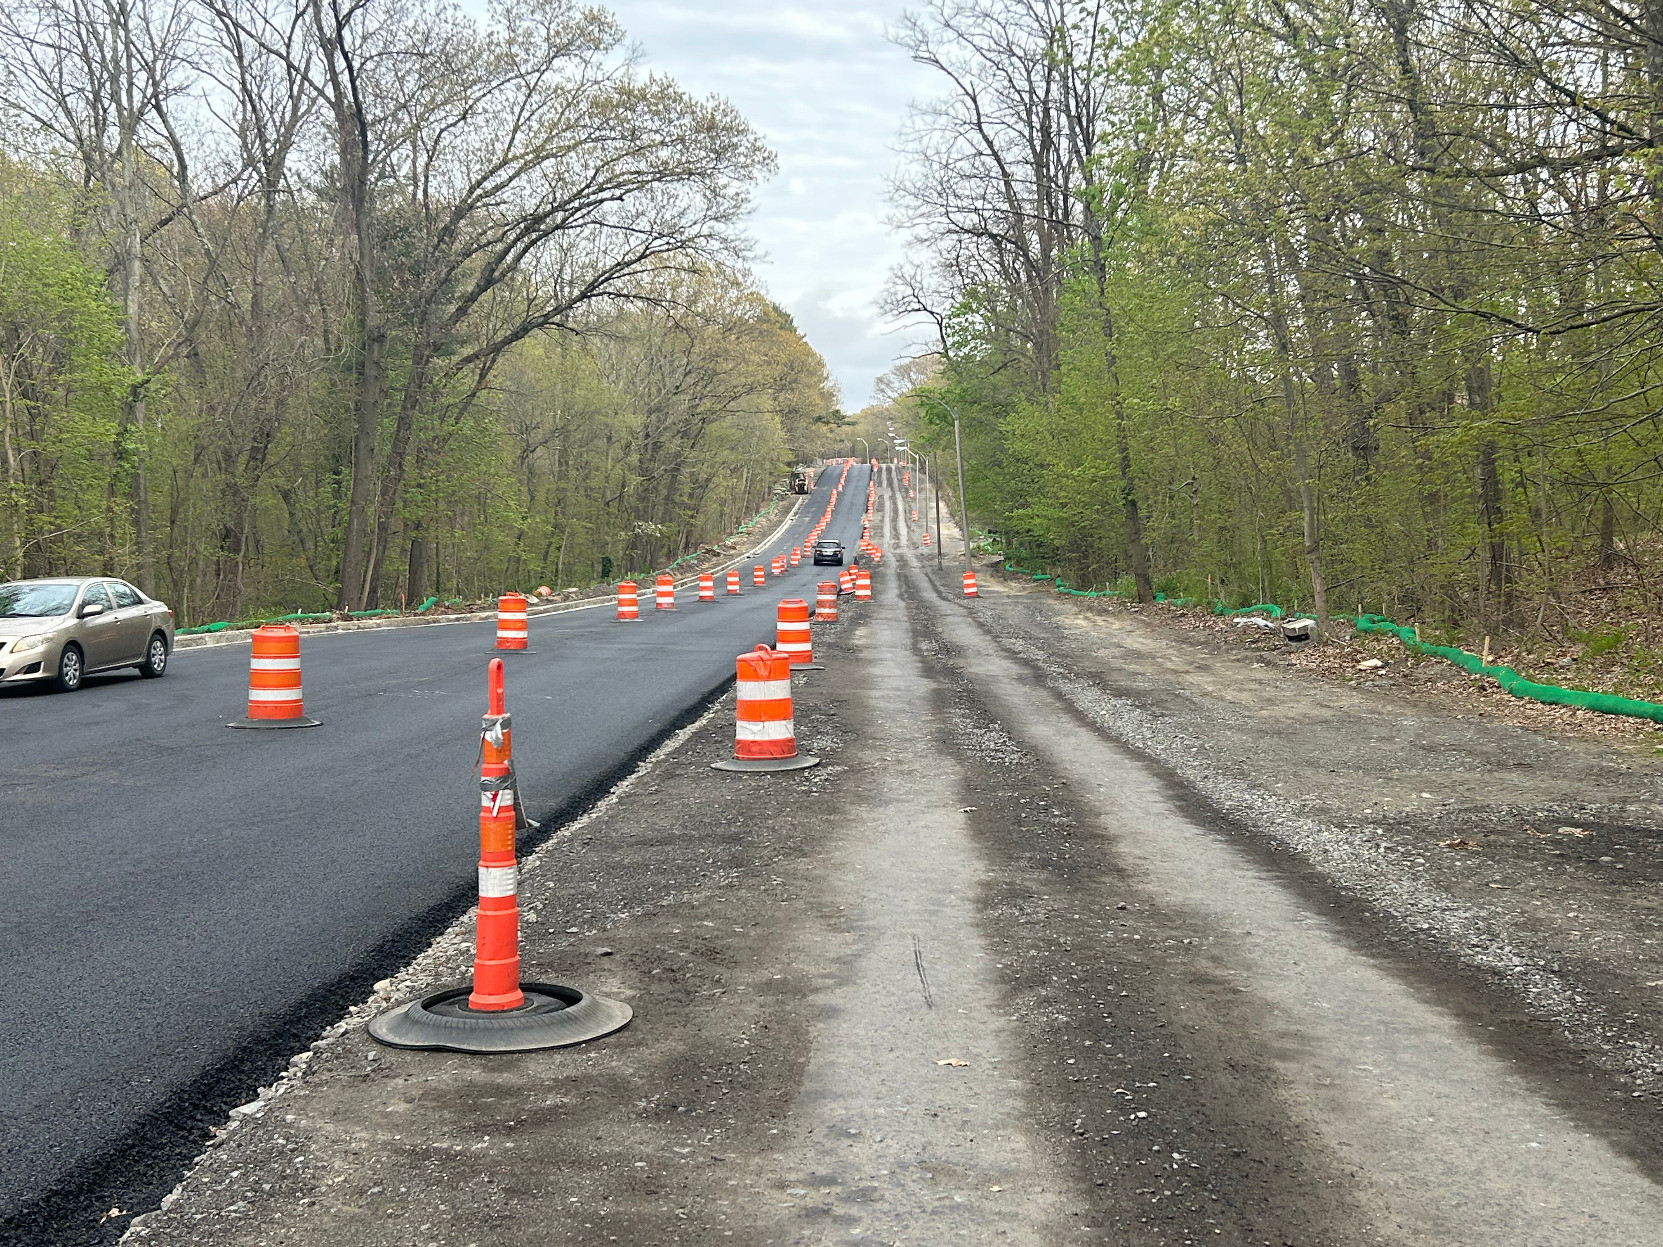 A freshly-paved two-lane road is lined with orange construction barrels stretching into the distance. The road is surrounded by trees just beginning to grow their leaves. A wide dirt track runs along the right edge of the pavement.